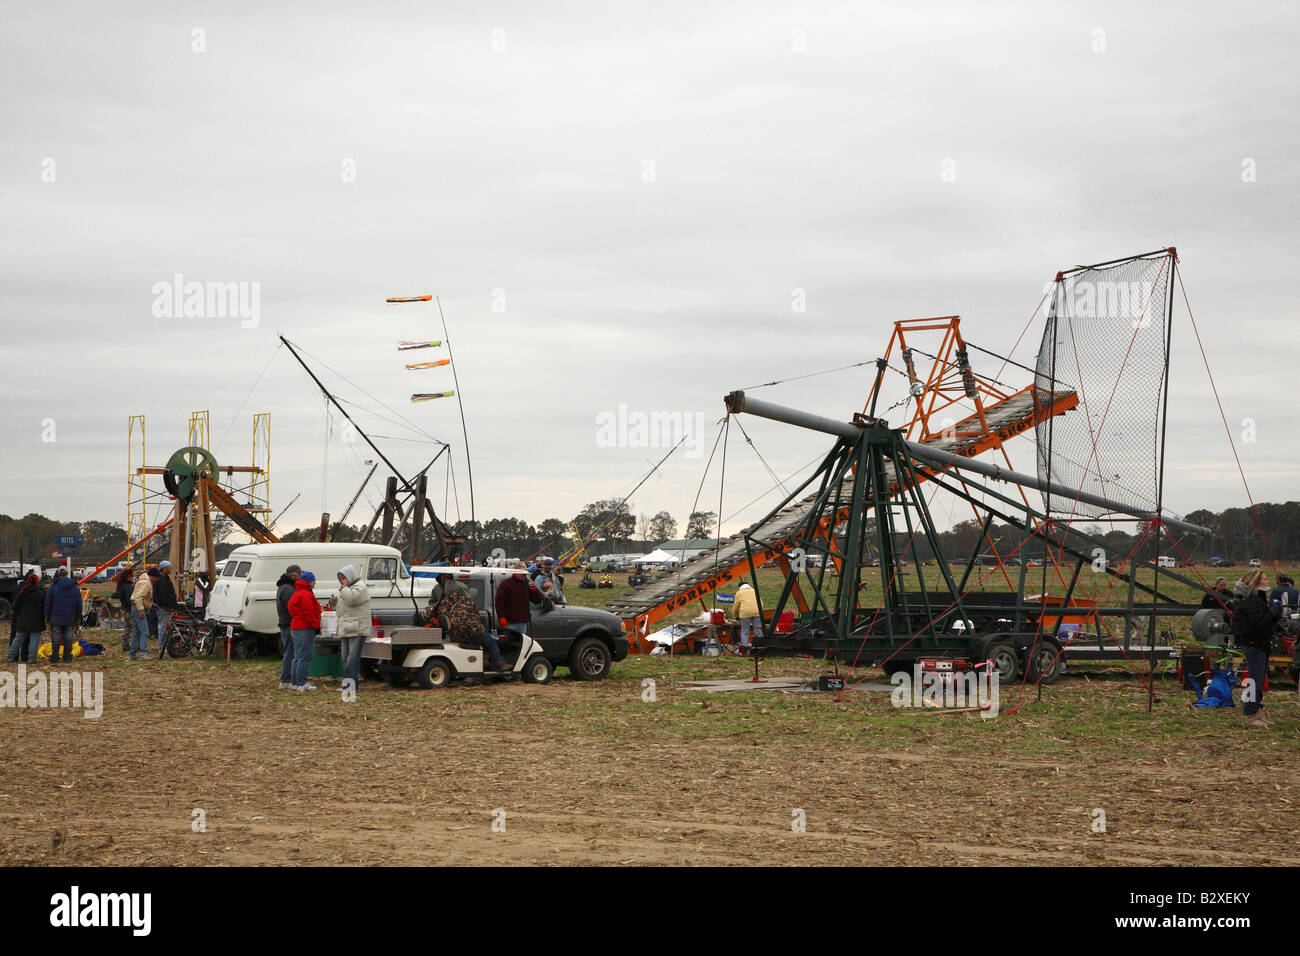 Assortment of catapults and human powered machines line the side of competition field along with support vehicles and owners Stock Photo